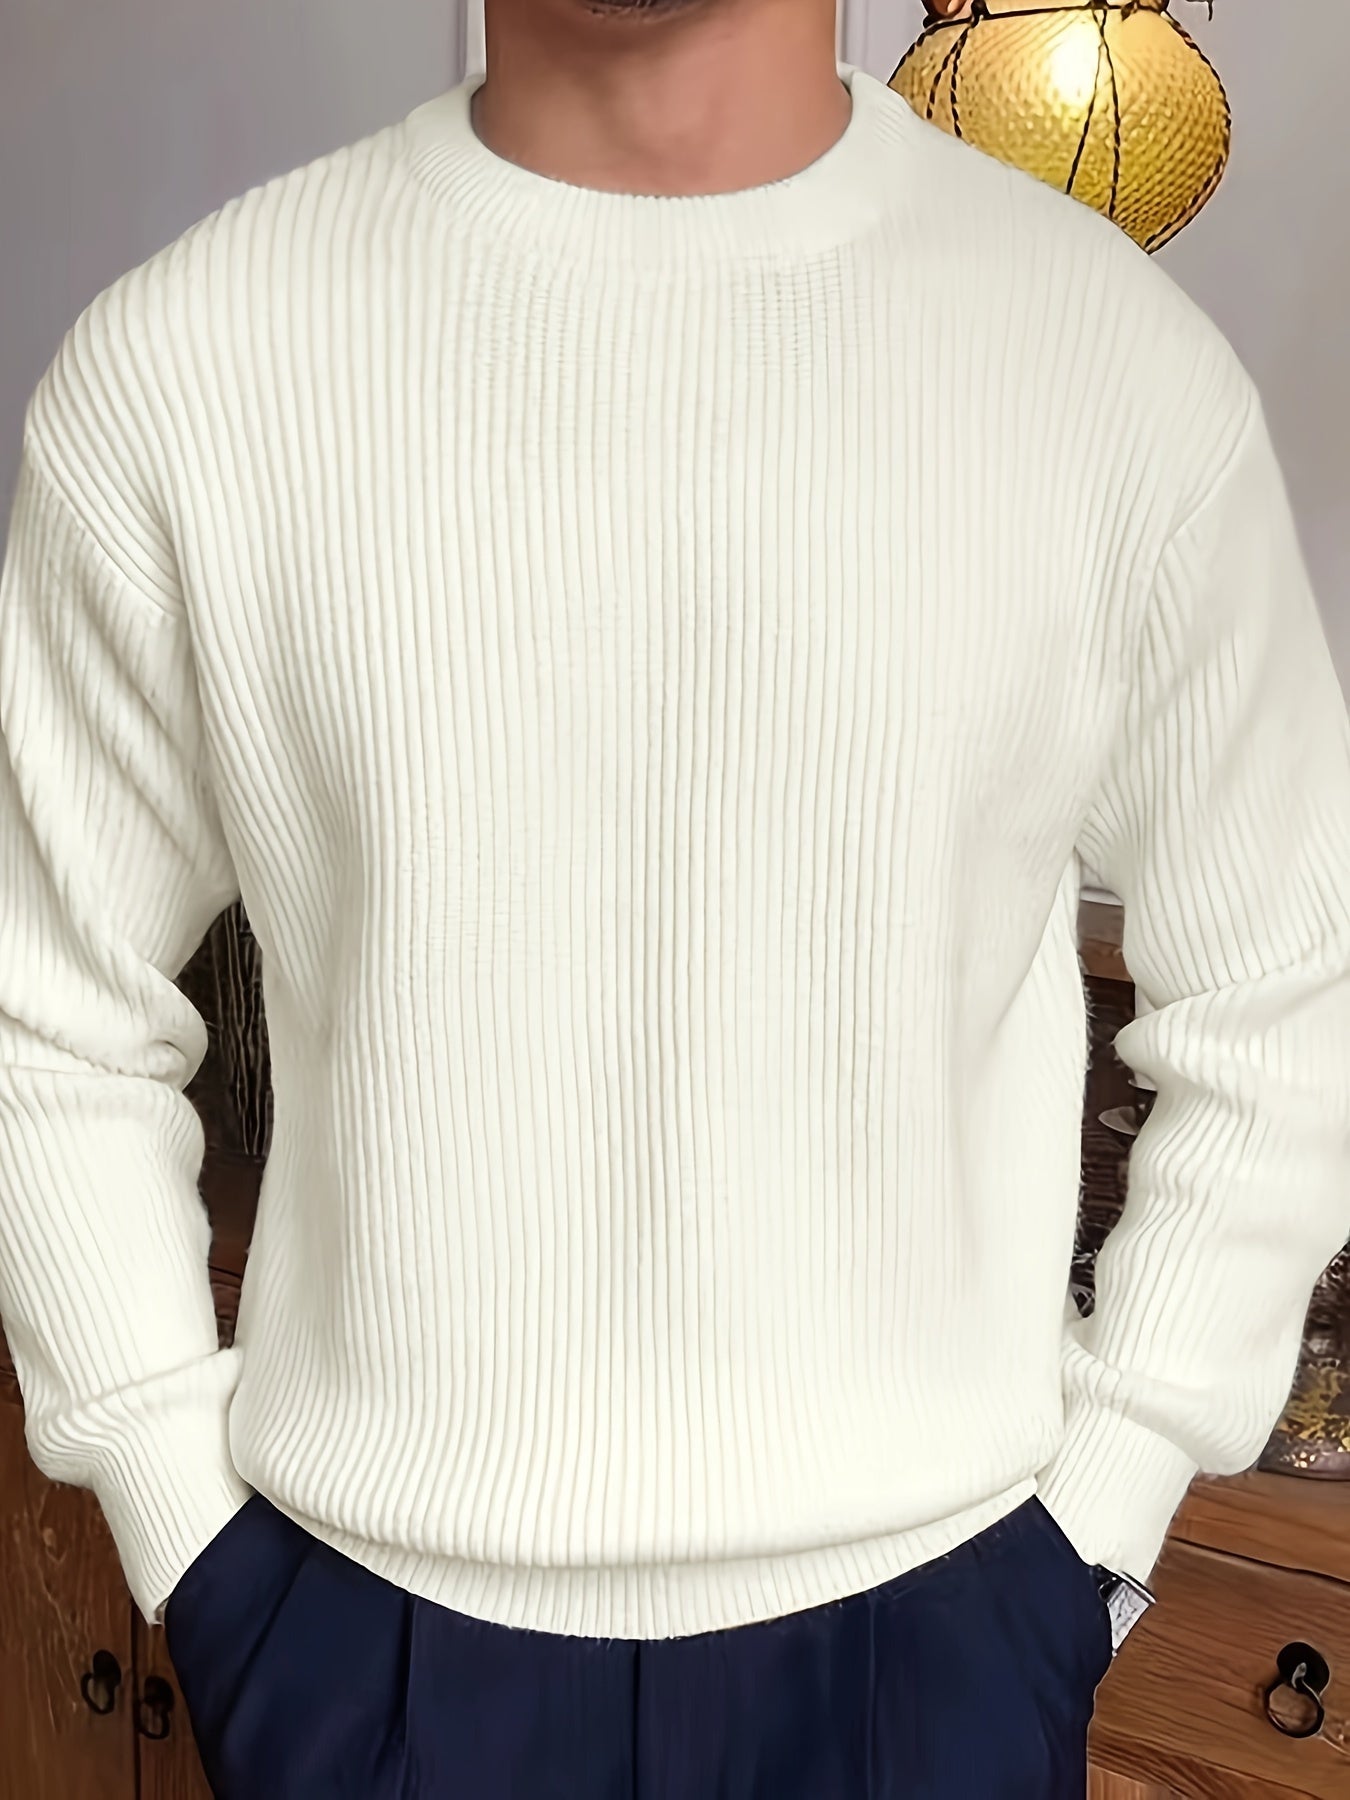 Foruwish - Warm Texture Knitted Sweater, Men's Casual Solid Color Slightly Stretch Round Neck Pullover Sweater For Fall Winter